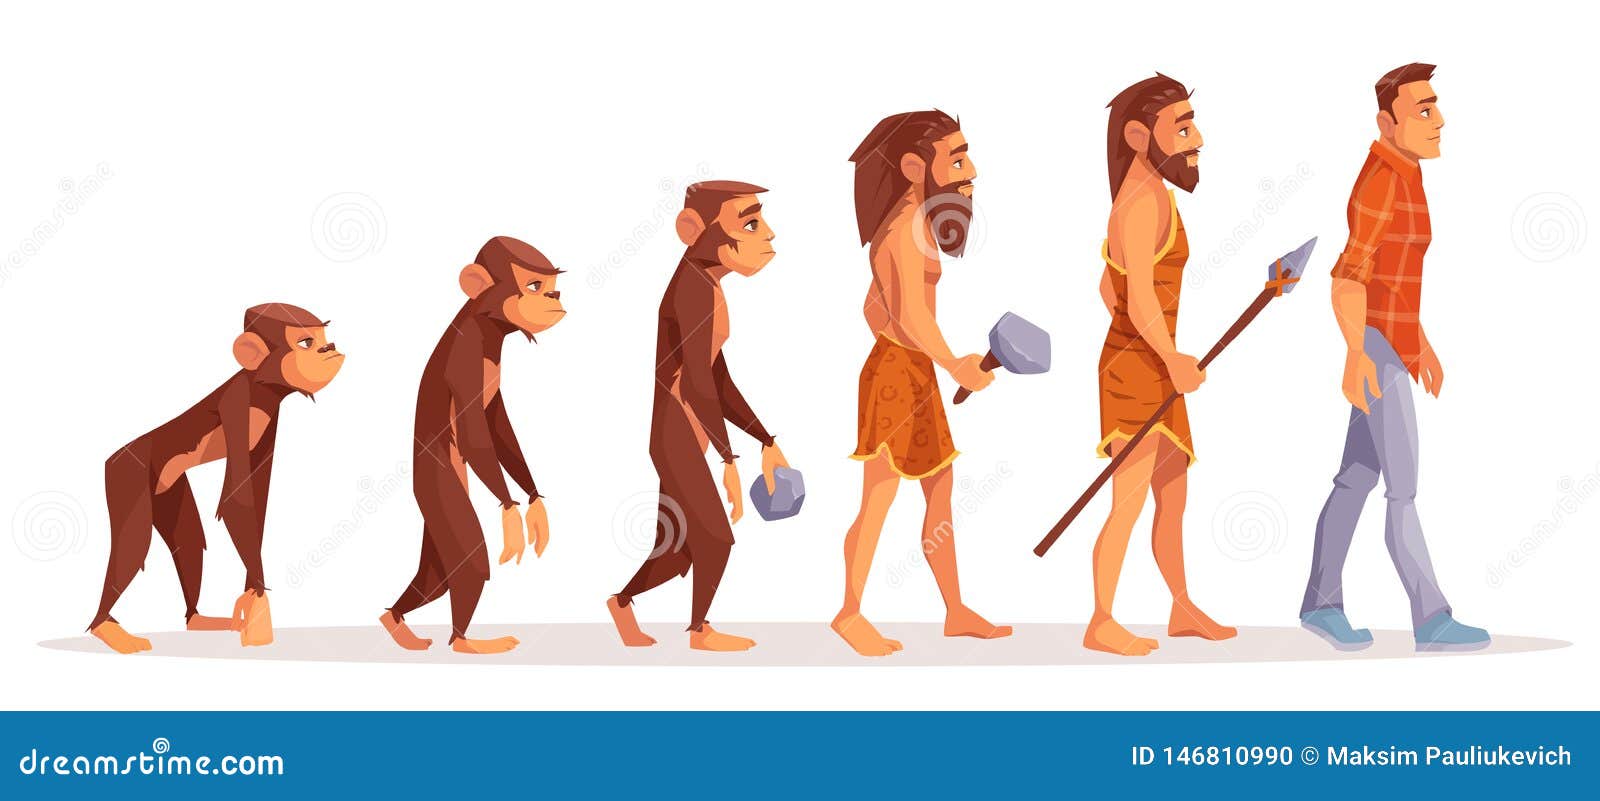 Human Evolution Stages Cartoon Vector Concept Stock Vector ...